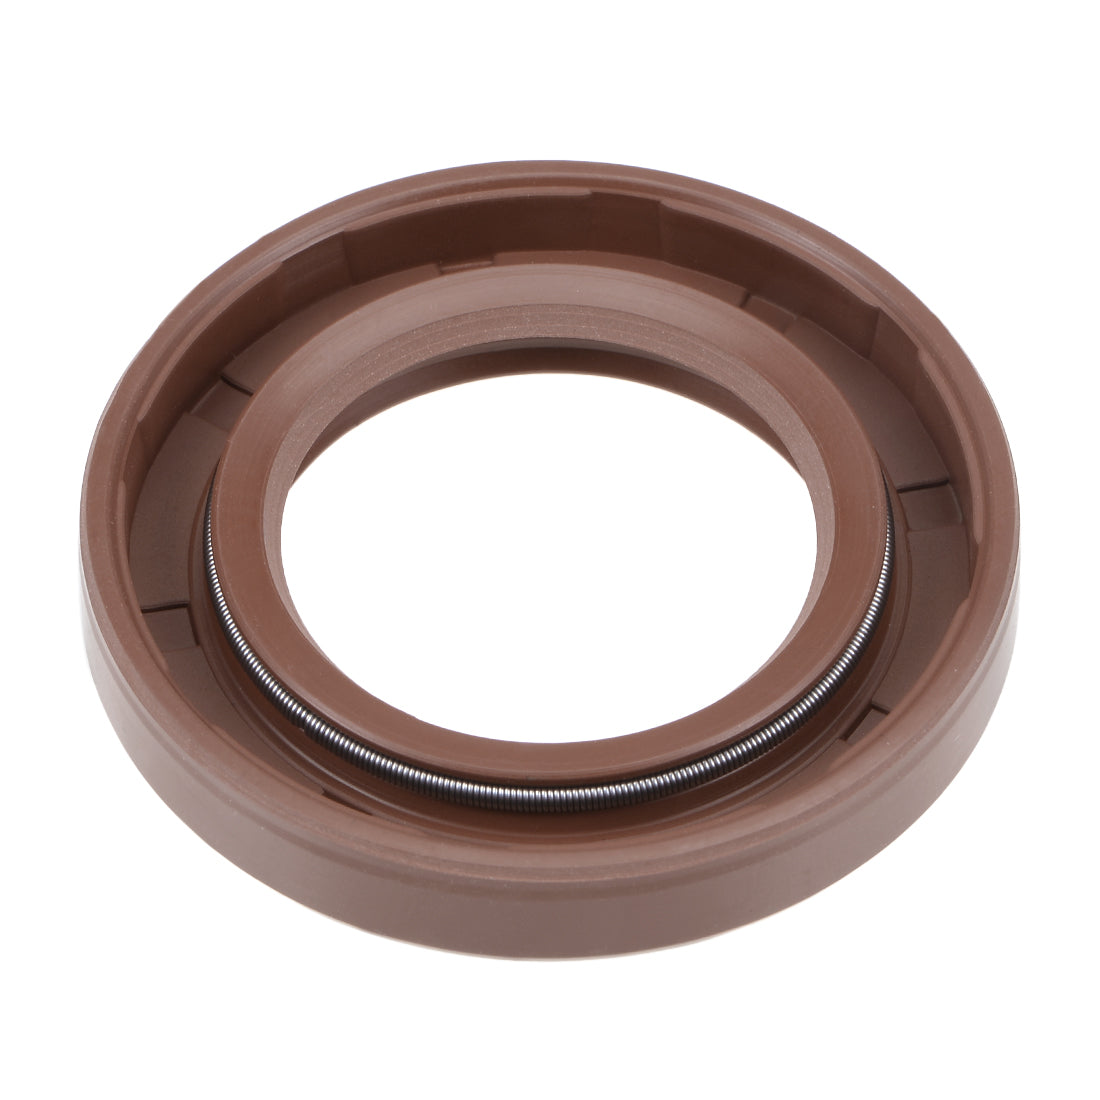 uxcell Uxcell Oil Seal 28mm Inner Dia 44mm OD 7mm Thick Fluorine Rubber Double Lip Seals 2Pcs